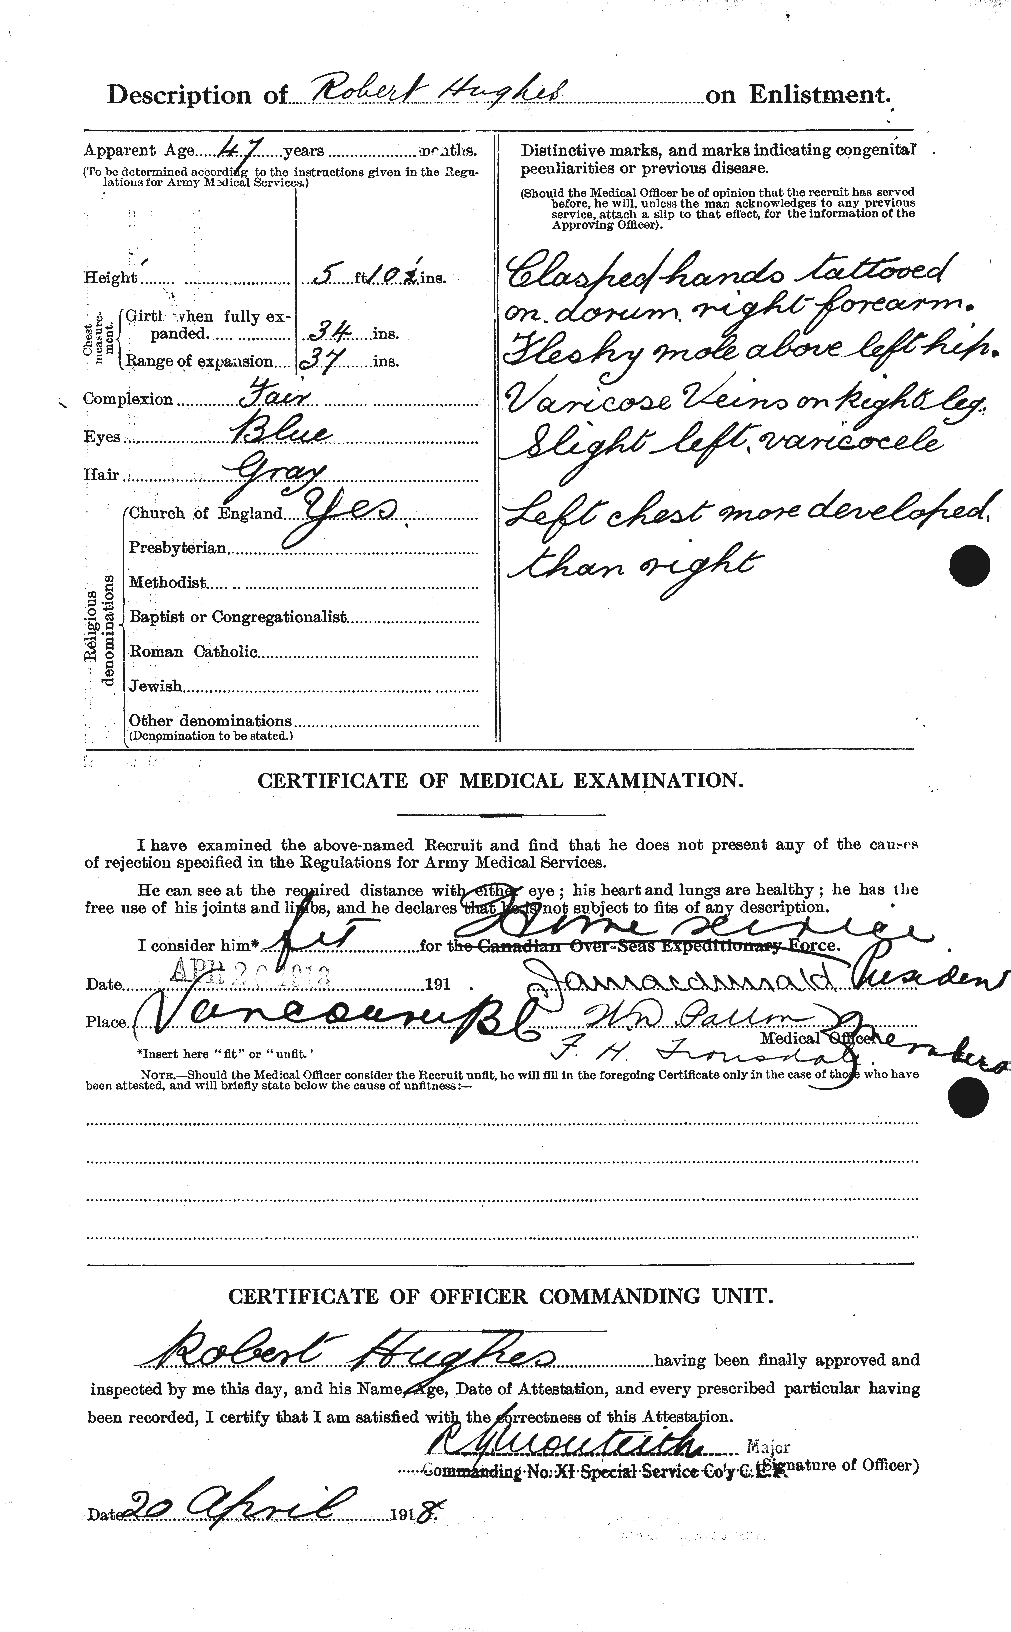 Personnel Records of the First World War - CEF 406602b